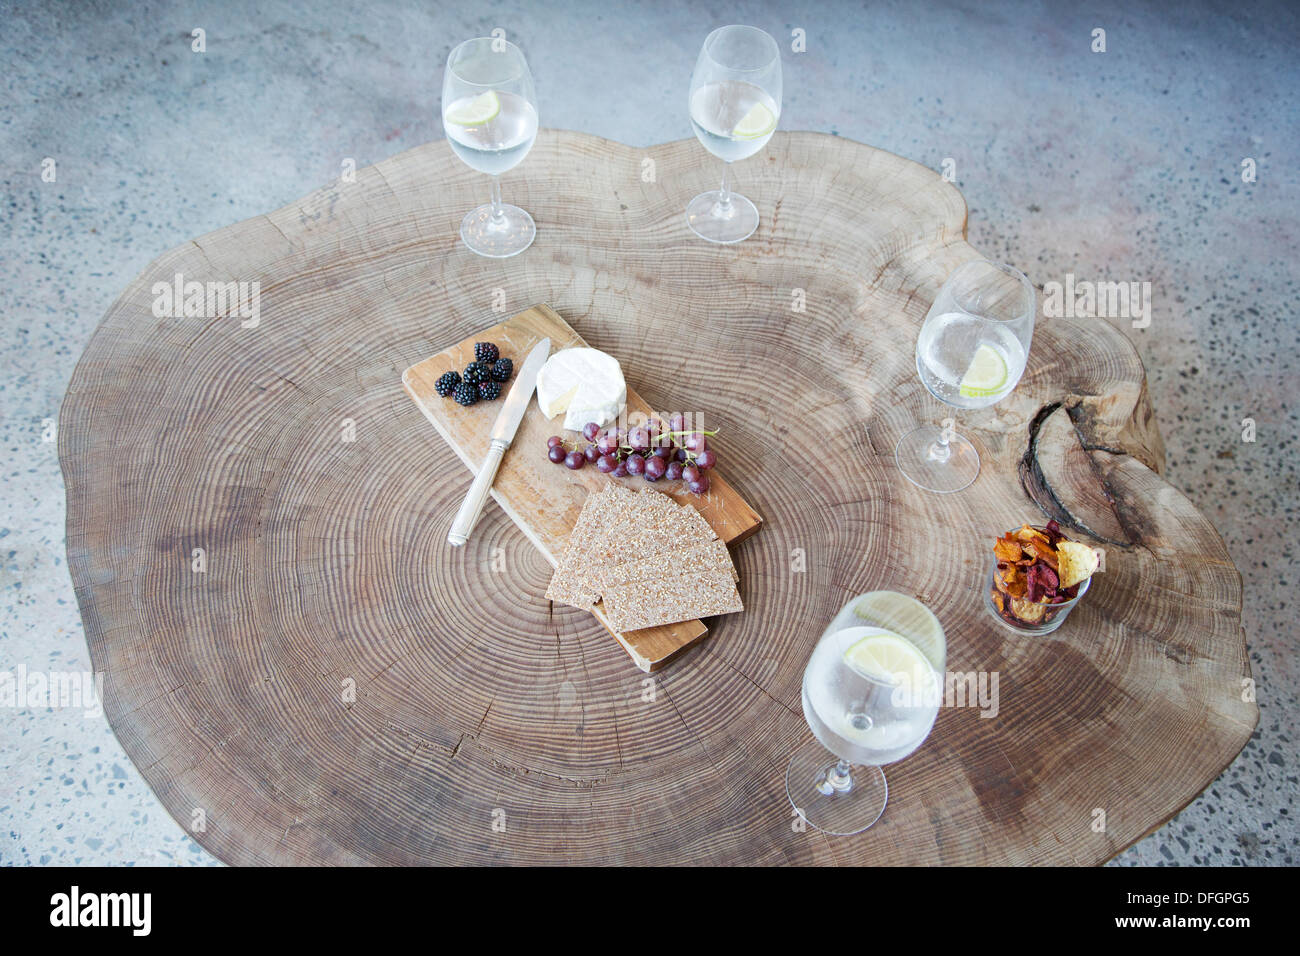 Fruit, cheese and wine on wood log table Stock Photo